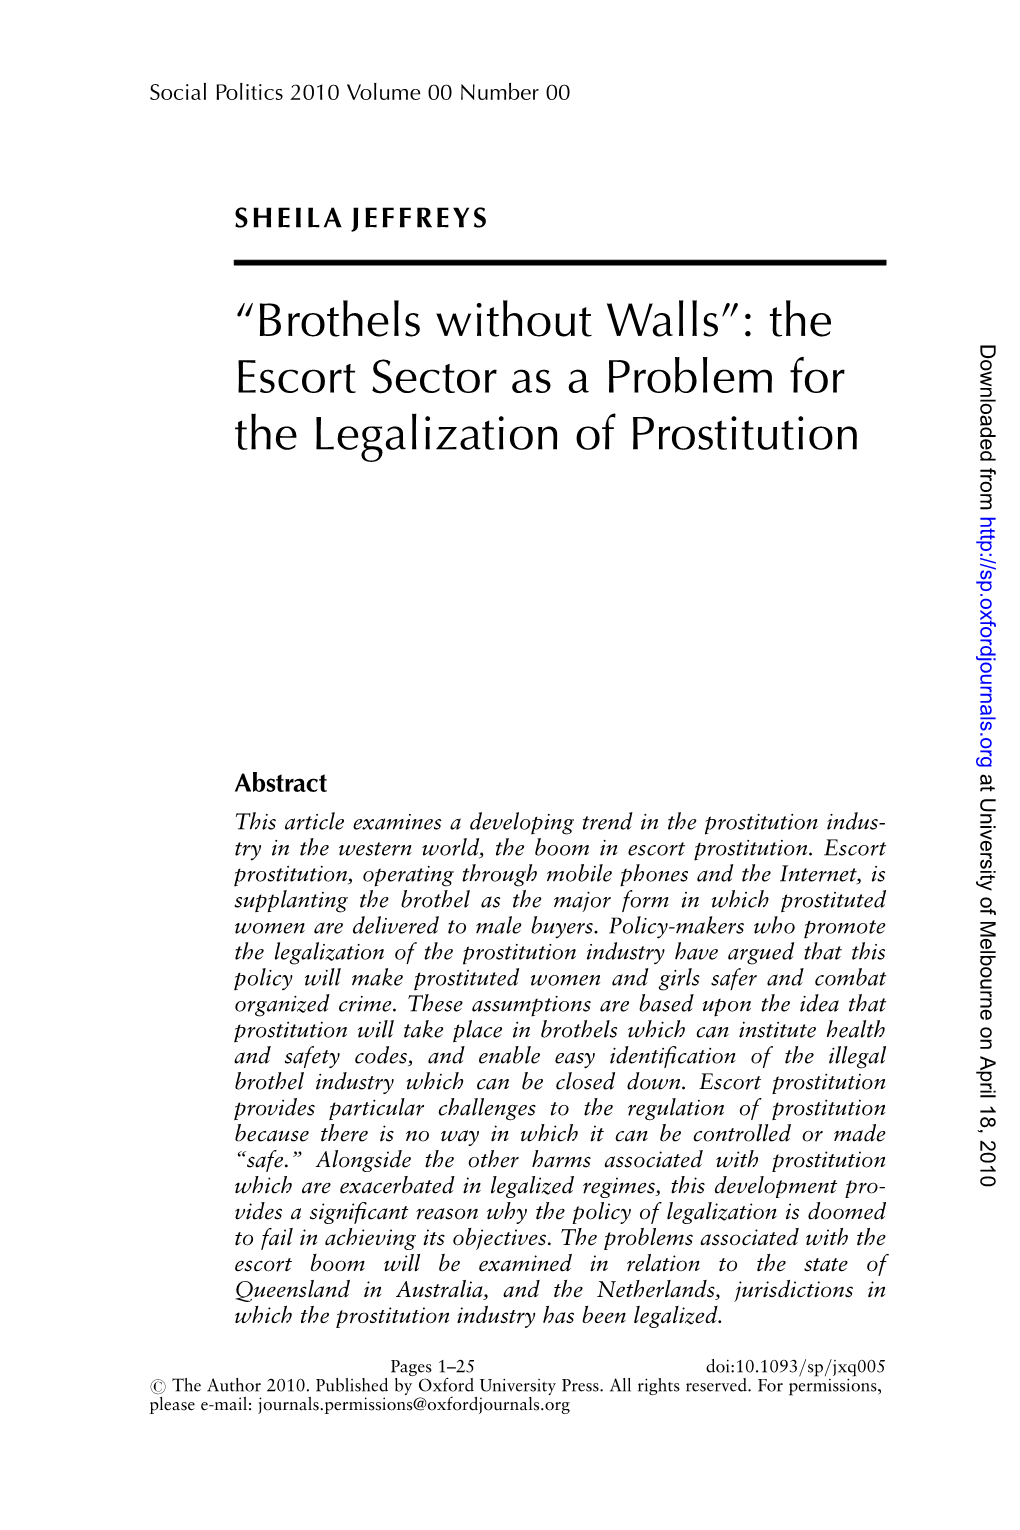 “Brothels Without Walls”: the Escort Sector As a Problem for the Legalization of Prostitution